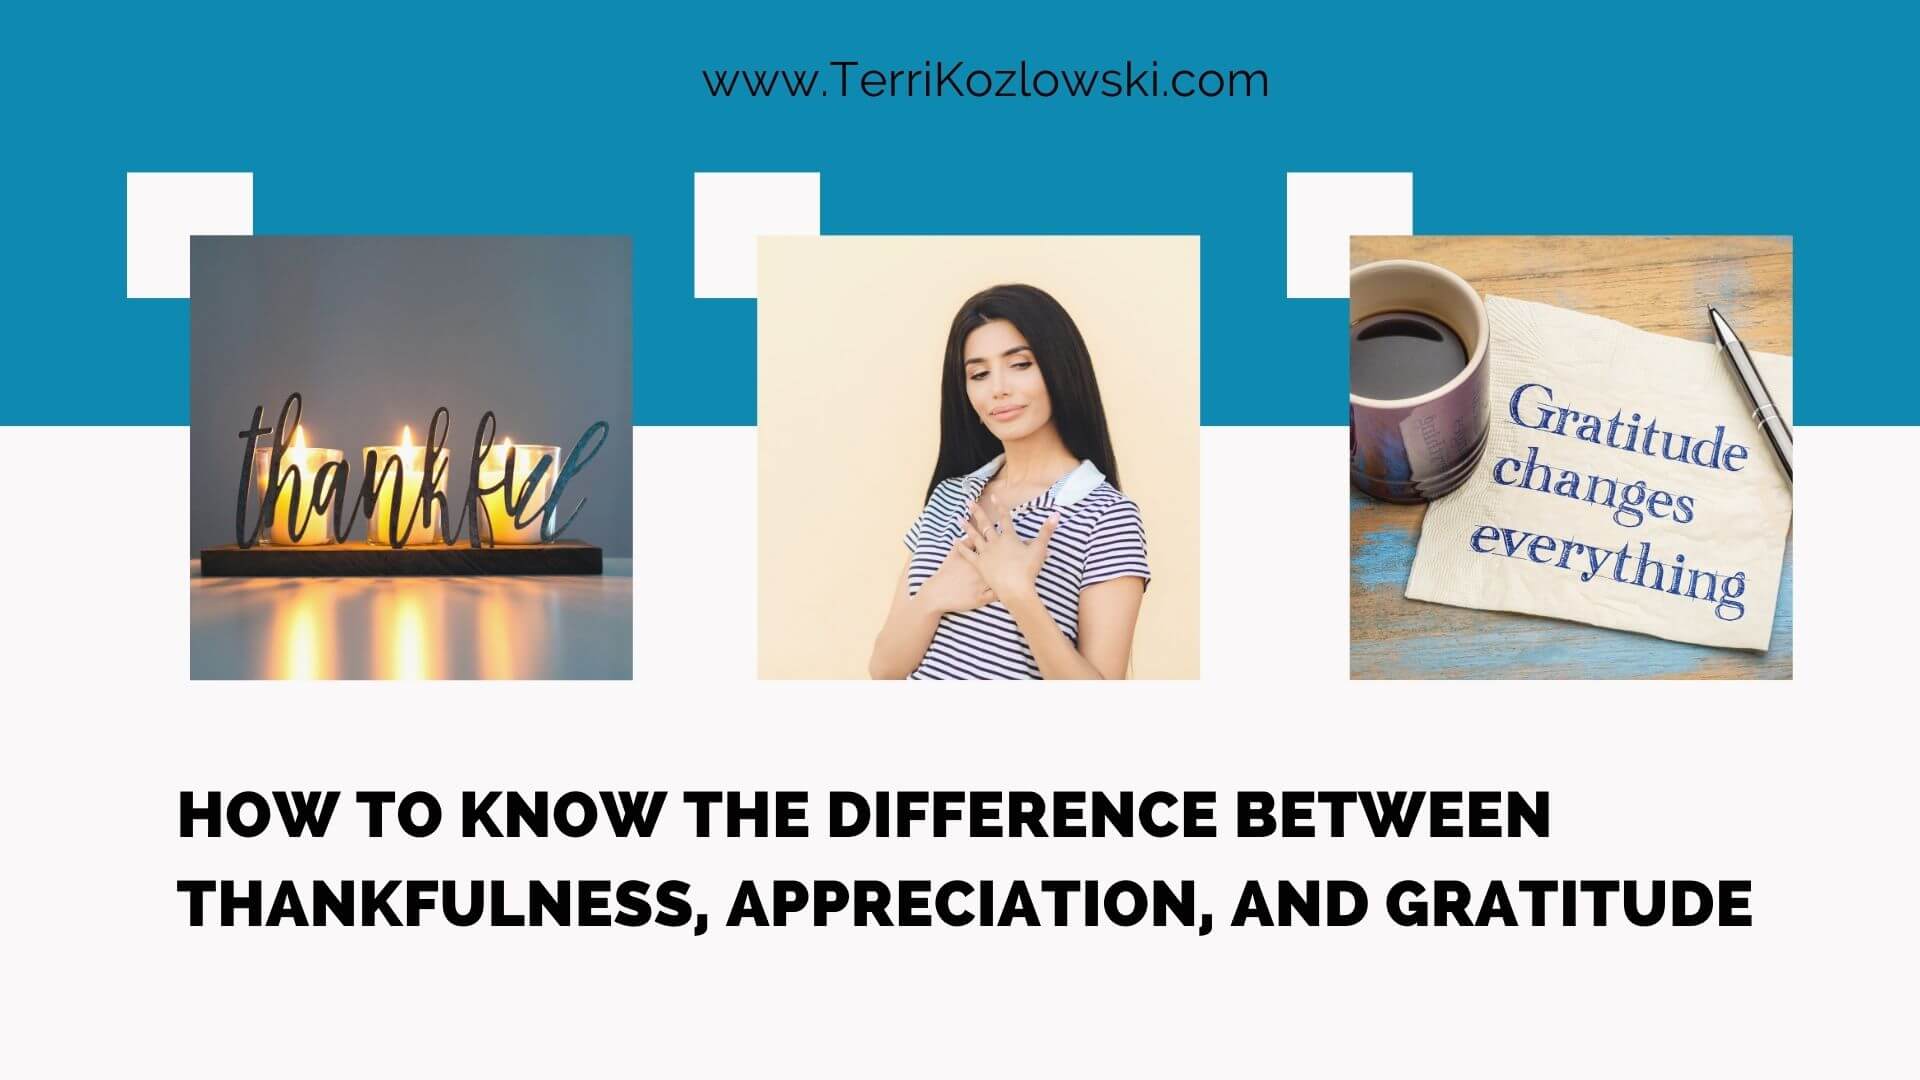 How to Know the Difference Between Thankfulness, Appreciation, and Gratitude